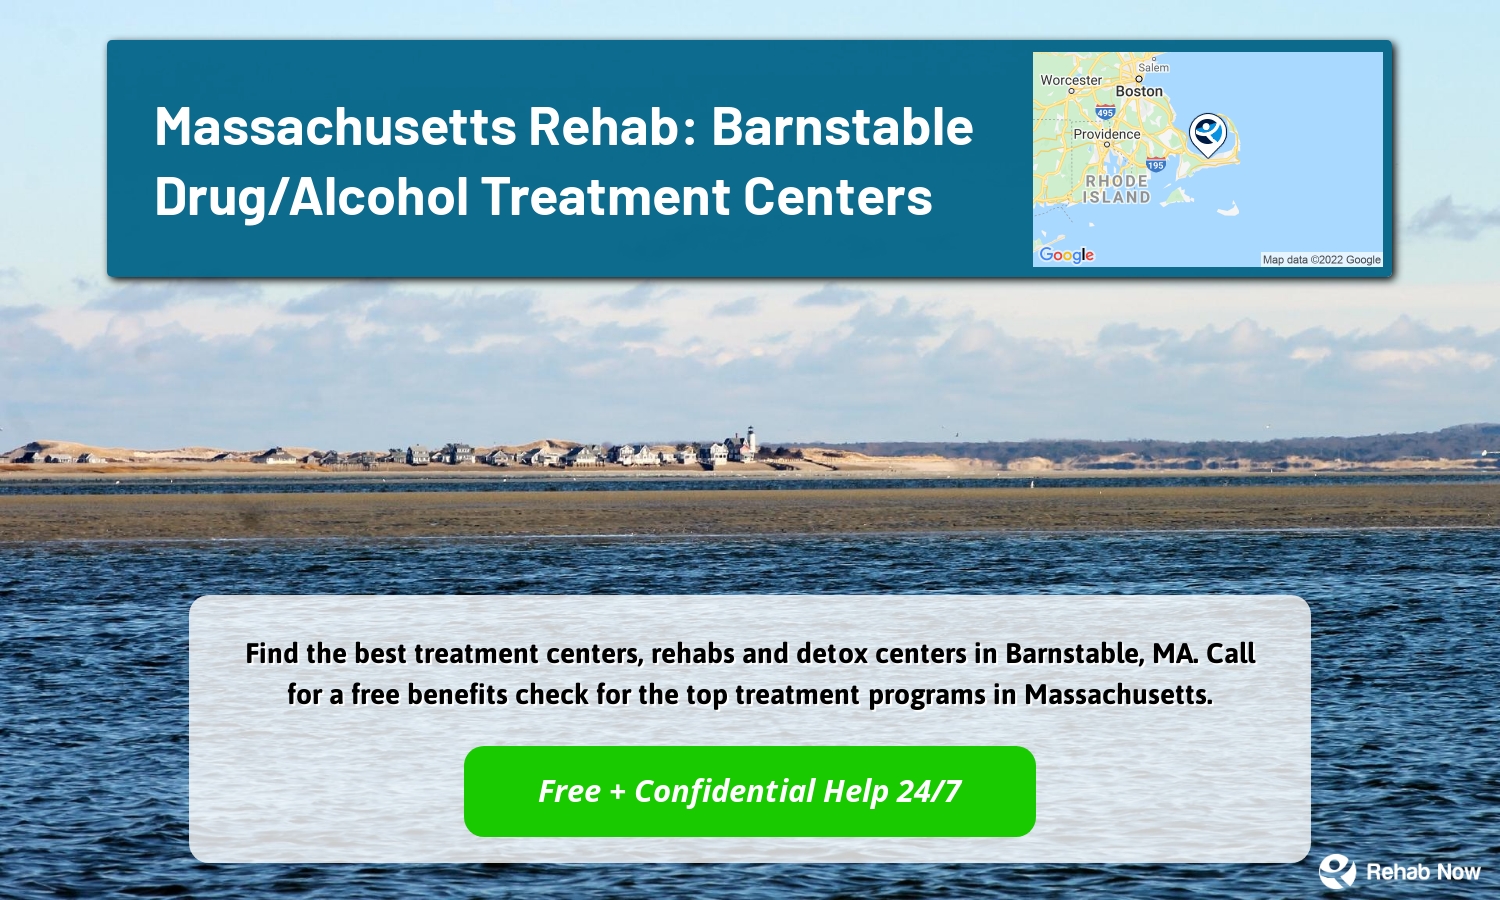 Find the best treatment centers, rehabs and detox centers in Barnstable, MA. Call for a free benefits check for the top treatment programs in Massachusetts.